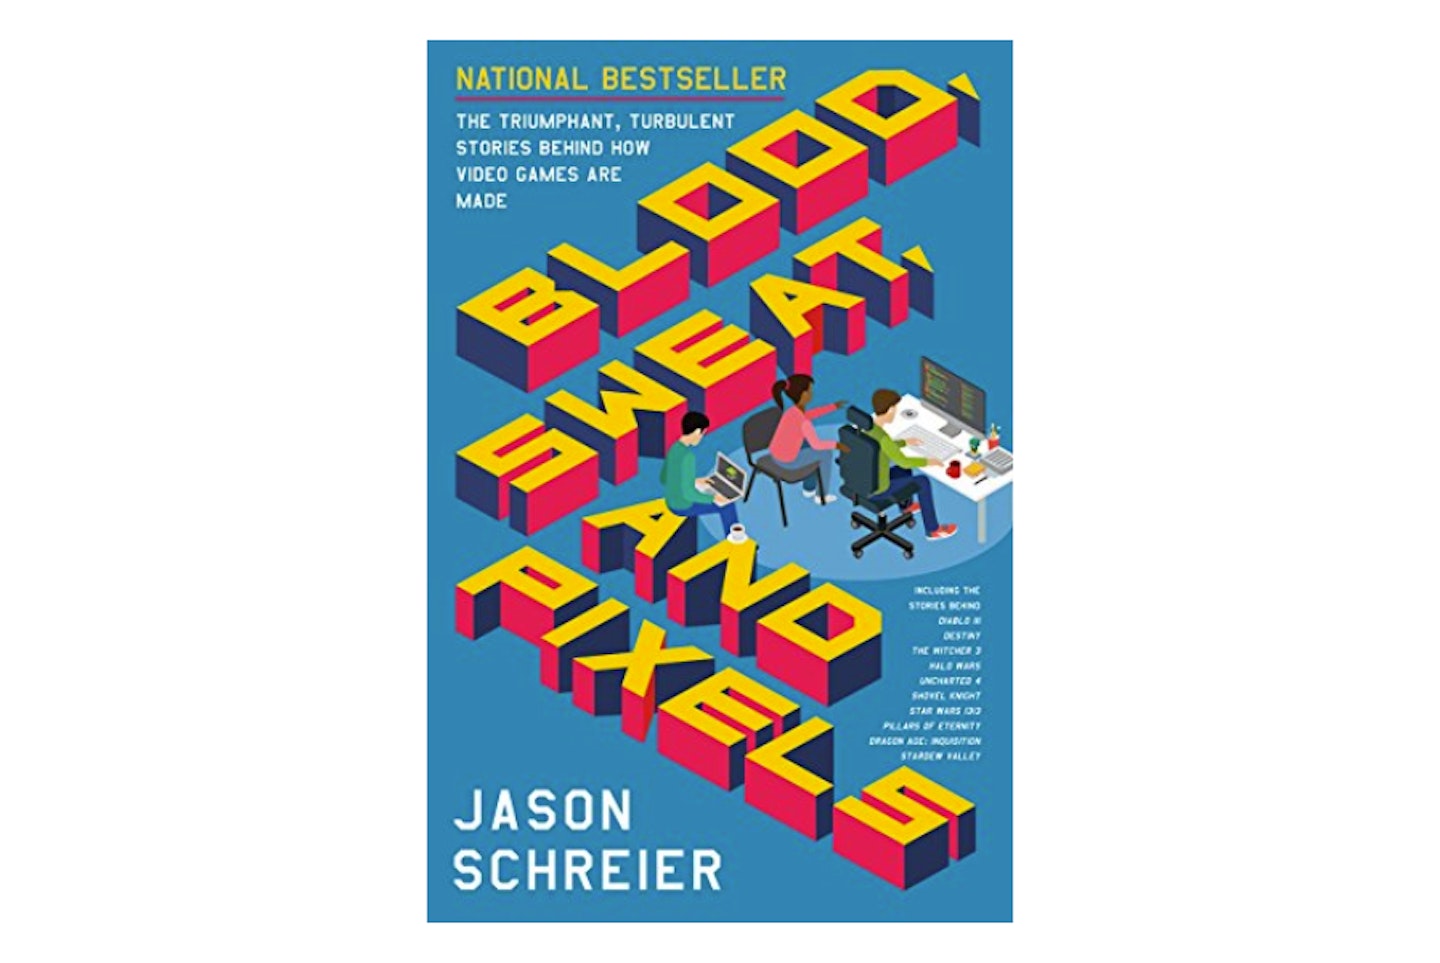 Blood, Sweat, and Pixels: The Triumphant, Turbulent Stories Behind How Video Games Are Made by Jason Schreier